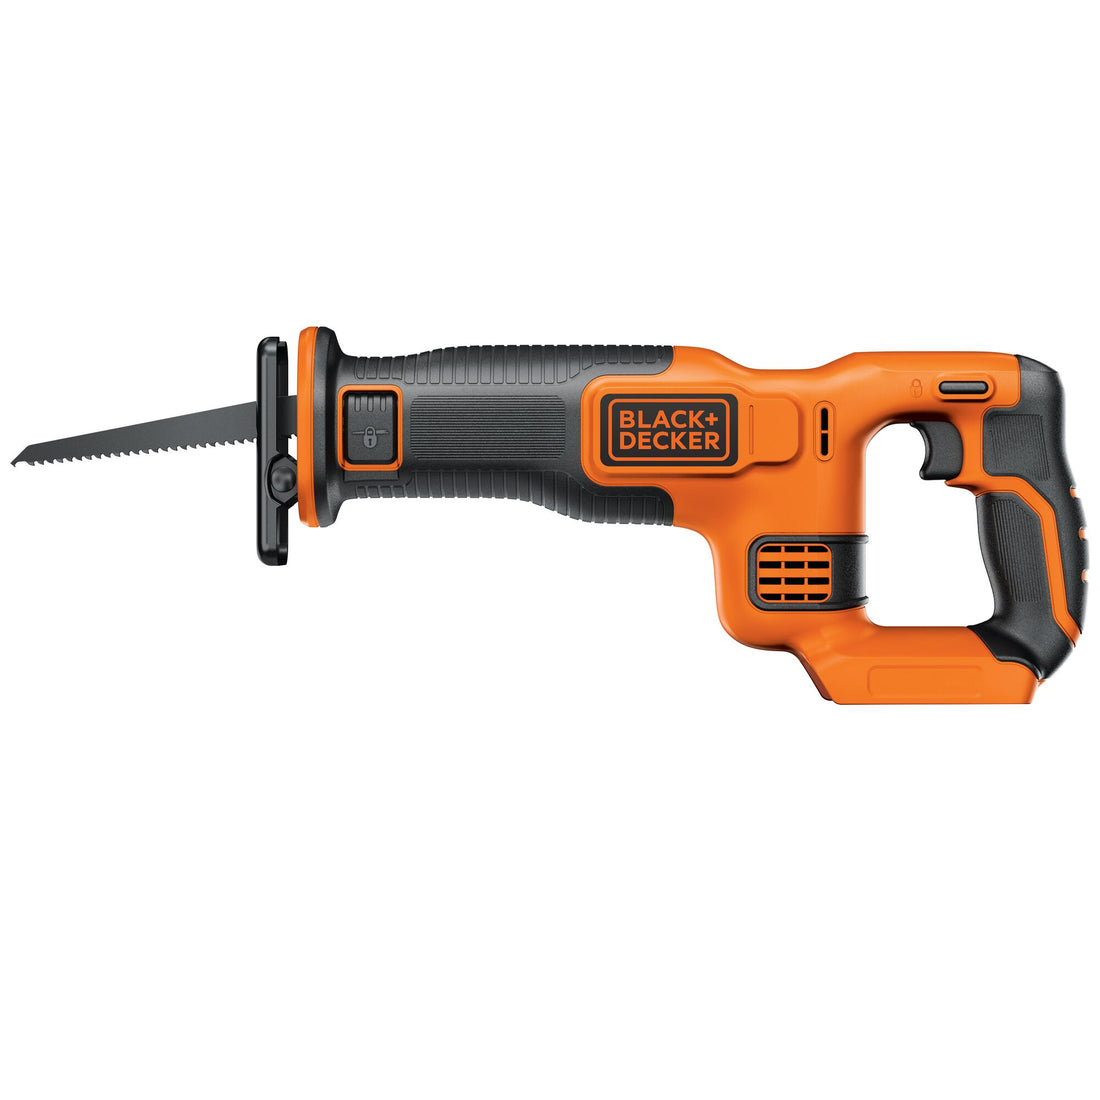 BLACK & DECKER 18V RECIPROCATING SAW, WITHOUT BATTERY AND CHARGER